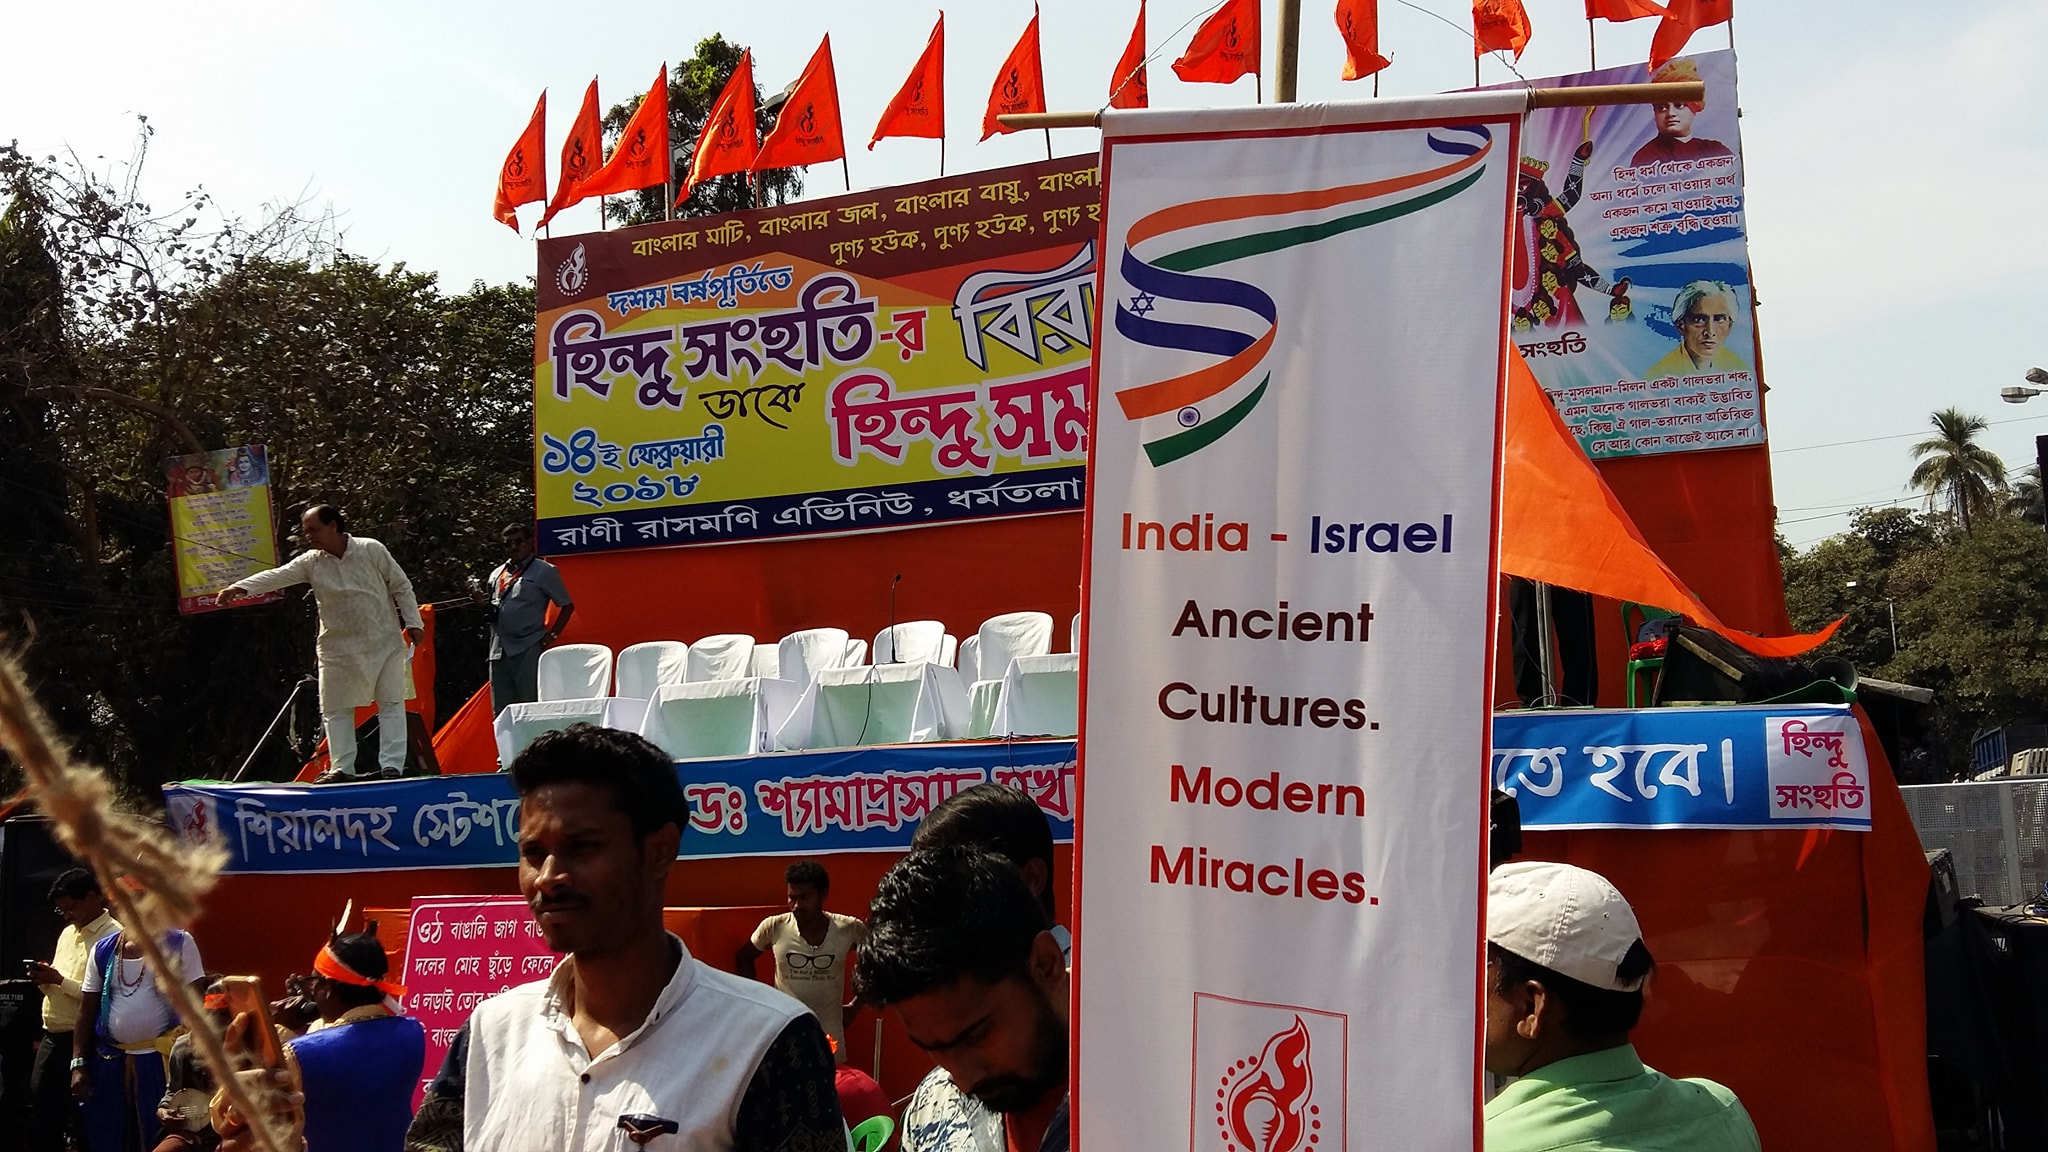 In Calcutta, tens of thousands at pro-Israel rally by far-right